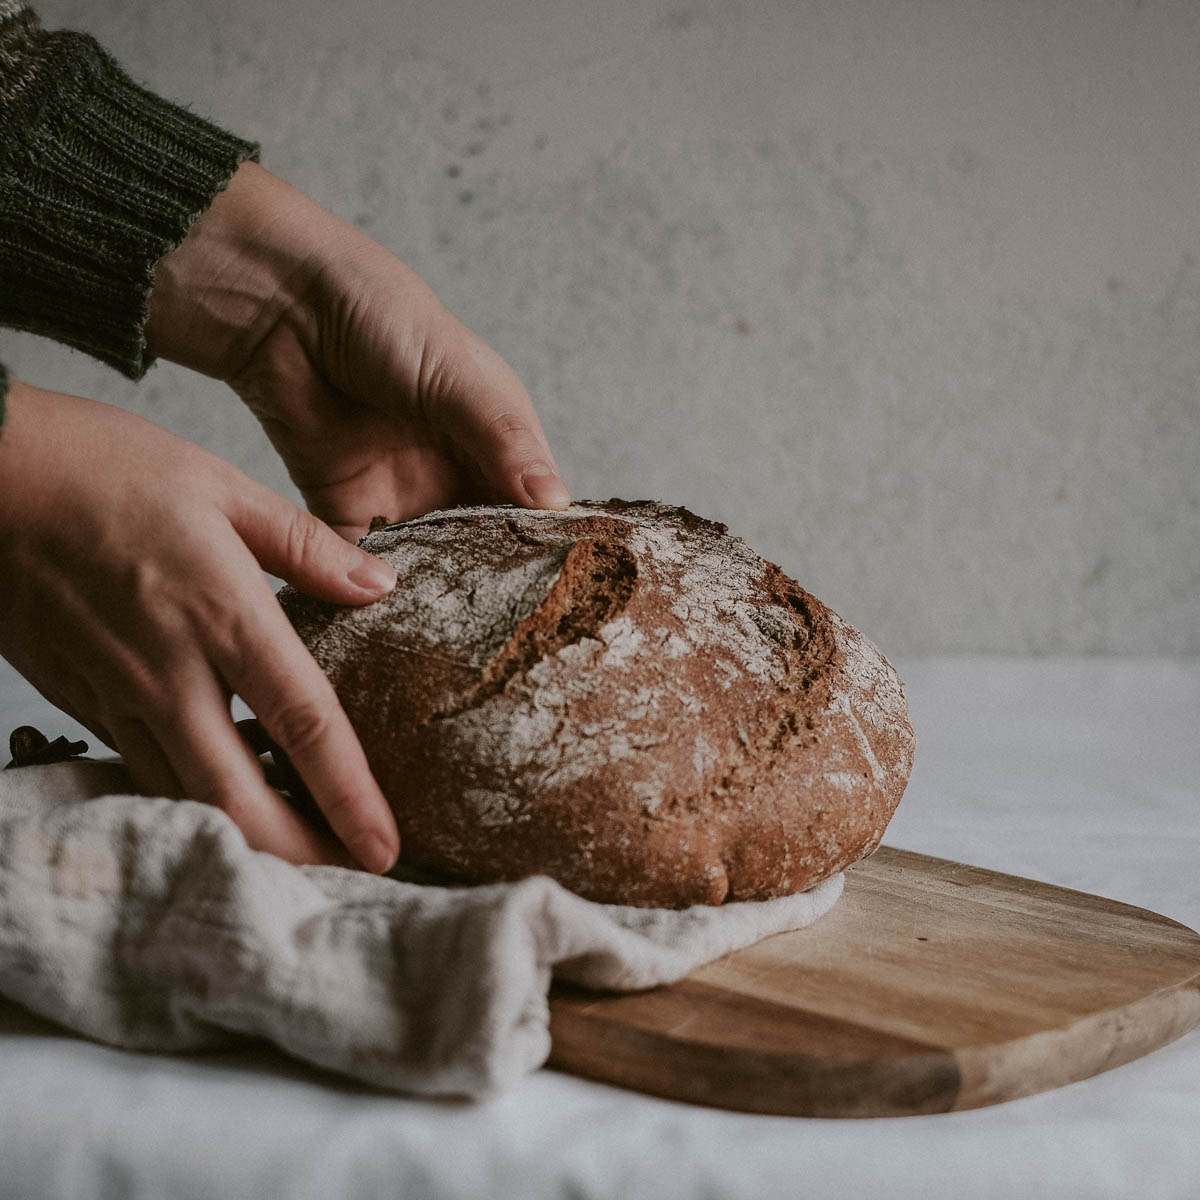 Girl placing a loaf of homemade artisan bread on a cutting board.